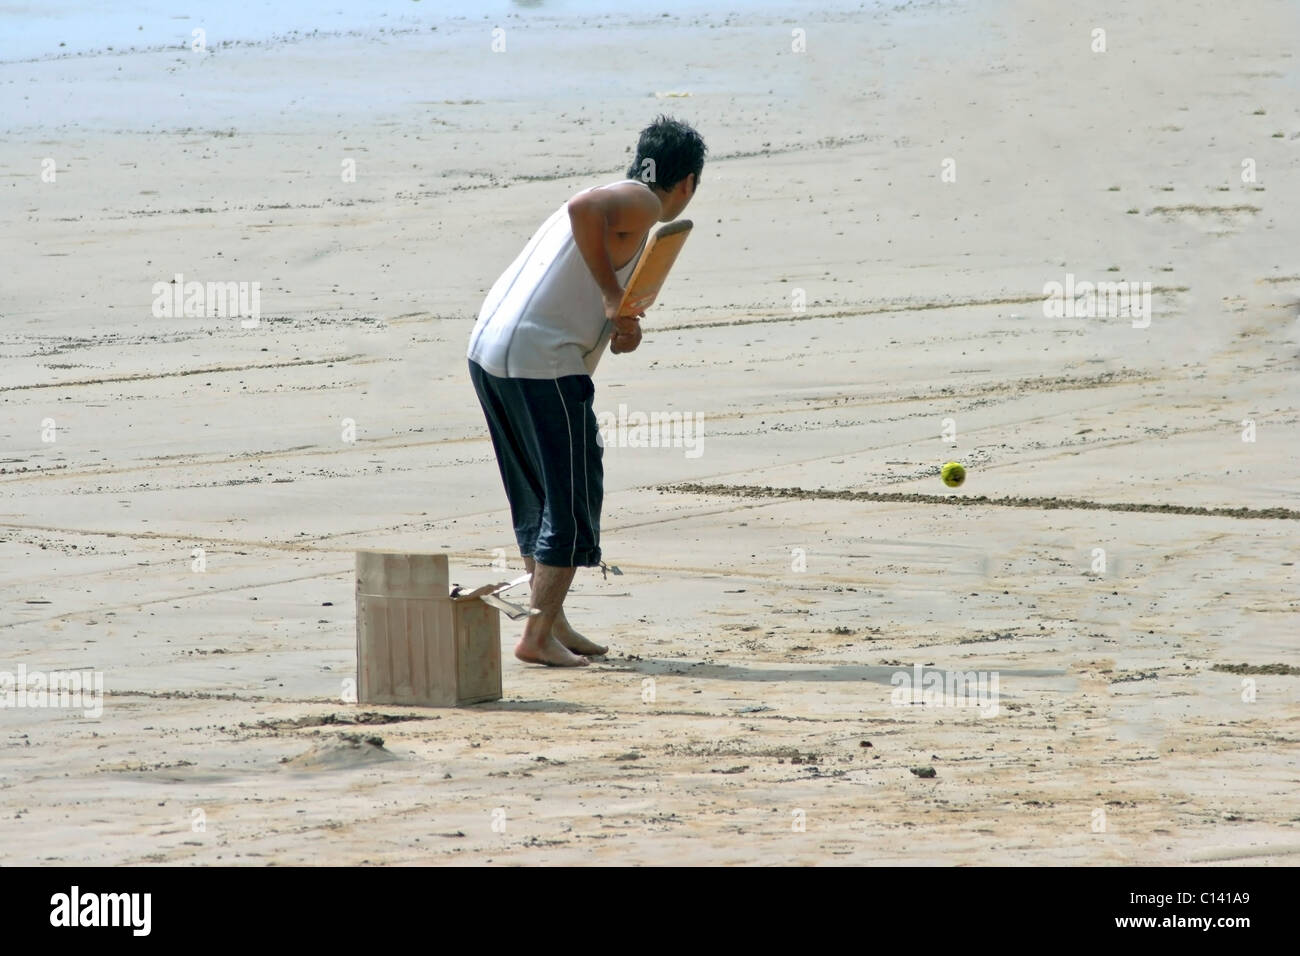 on menori beach, batsmen about to hit the ball over the boundry Stock Photo